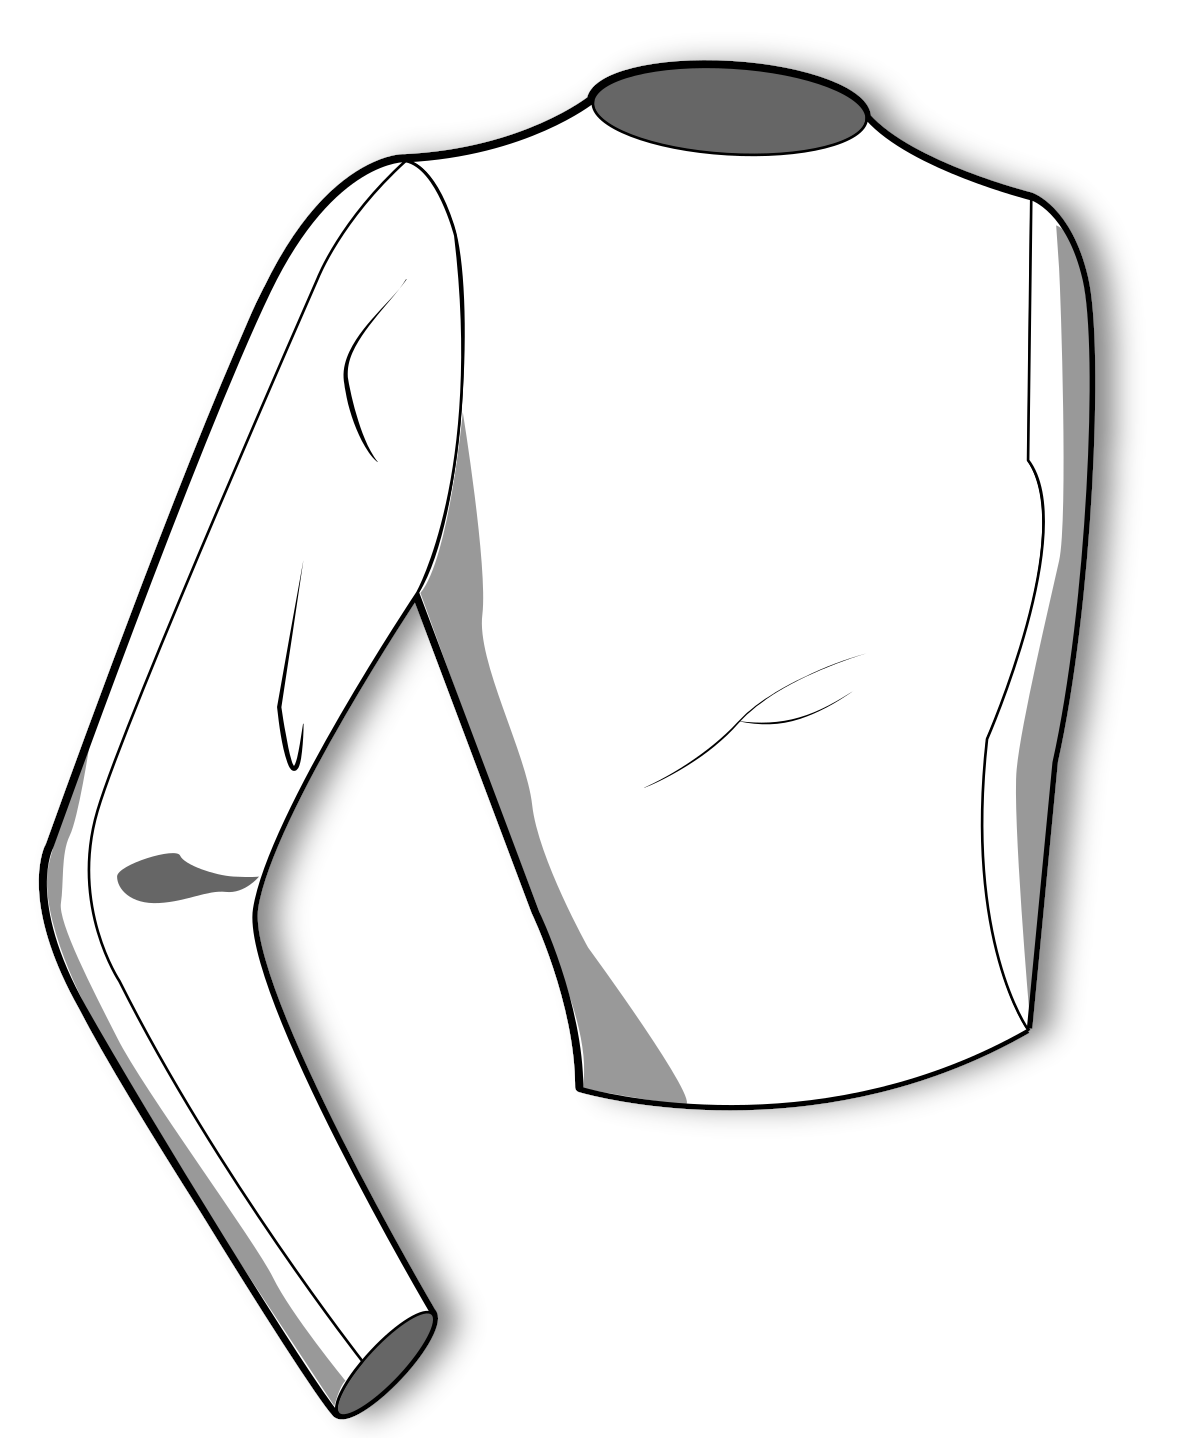 Set of sleeves to the base of a dress of a semi-fitted silhouette according to the method of M. Muller and Son (russian language)